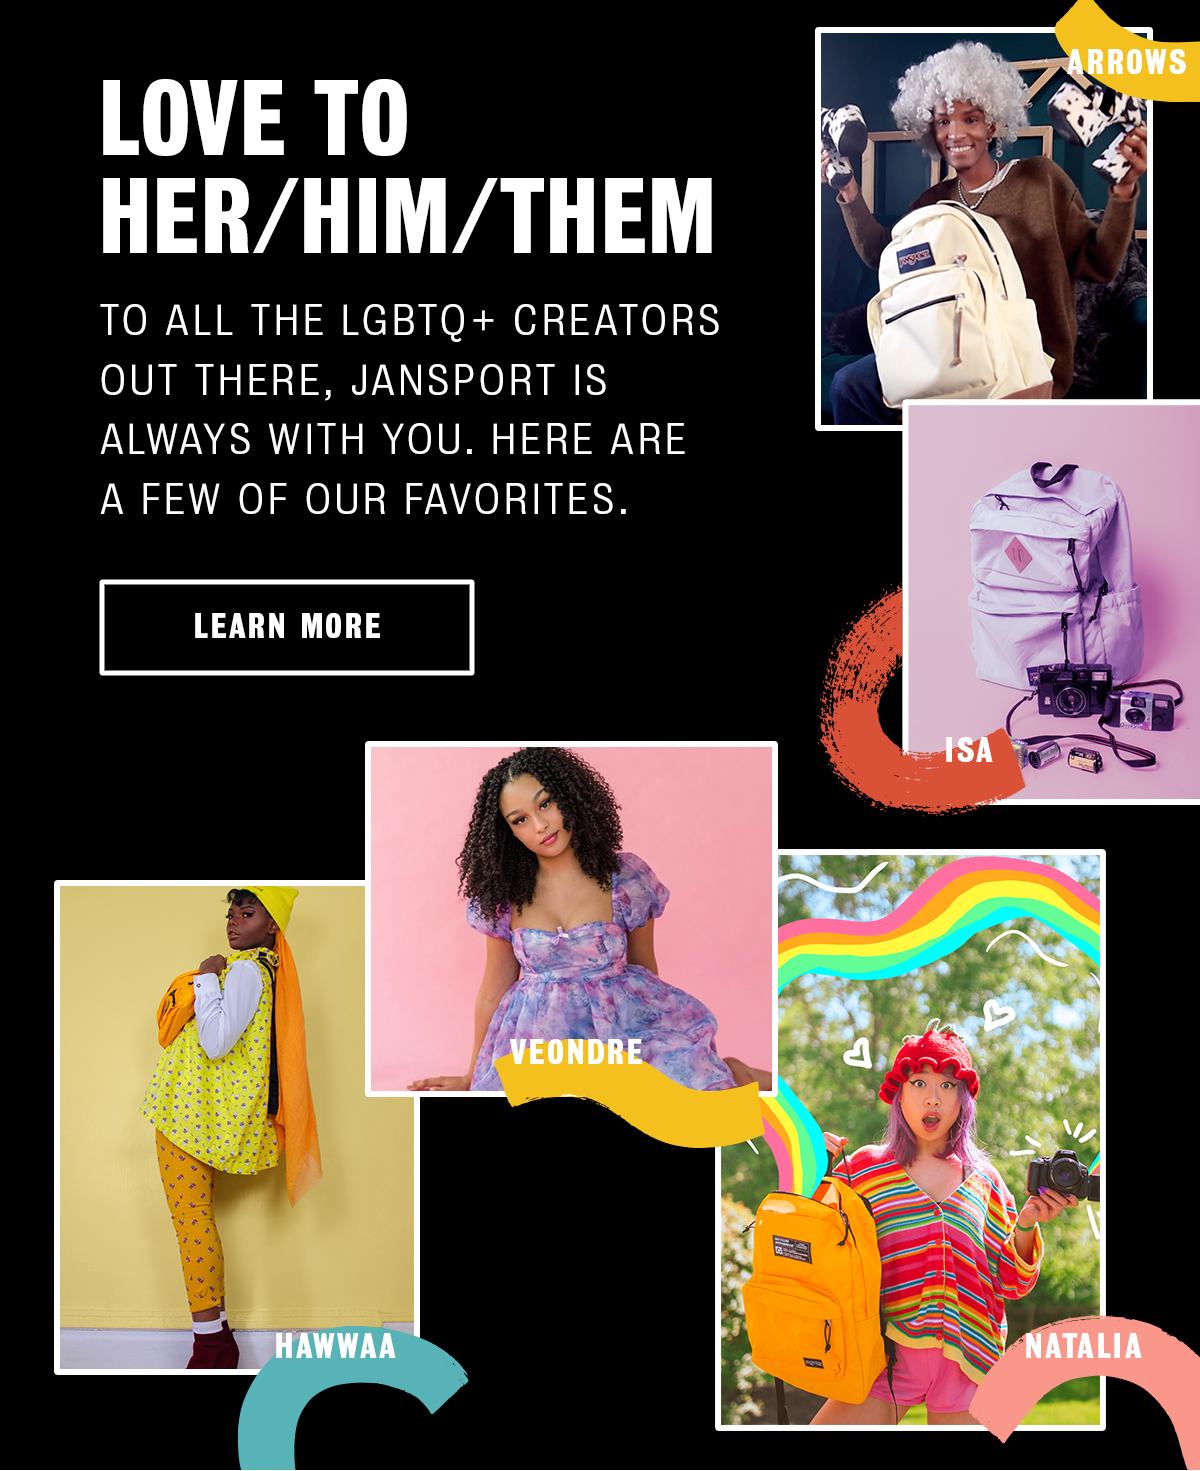 LOVE TO HER/HIM/THEM TO ALL THE LGBTQ+ CREATORS OUT THERE, JANSPORT IS ALWAYS WITH YOU. HERE ARE A FEW OF OUR FAVORITES. LEARN MORE